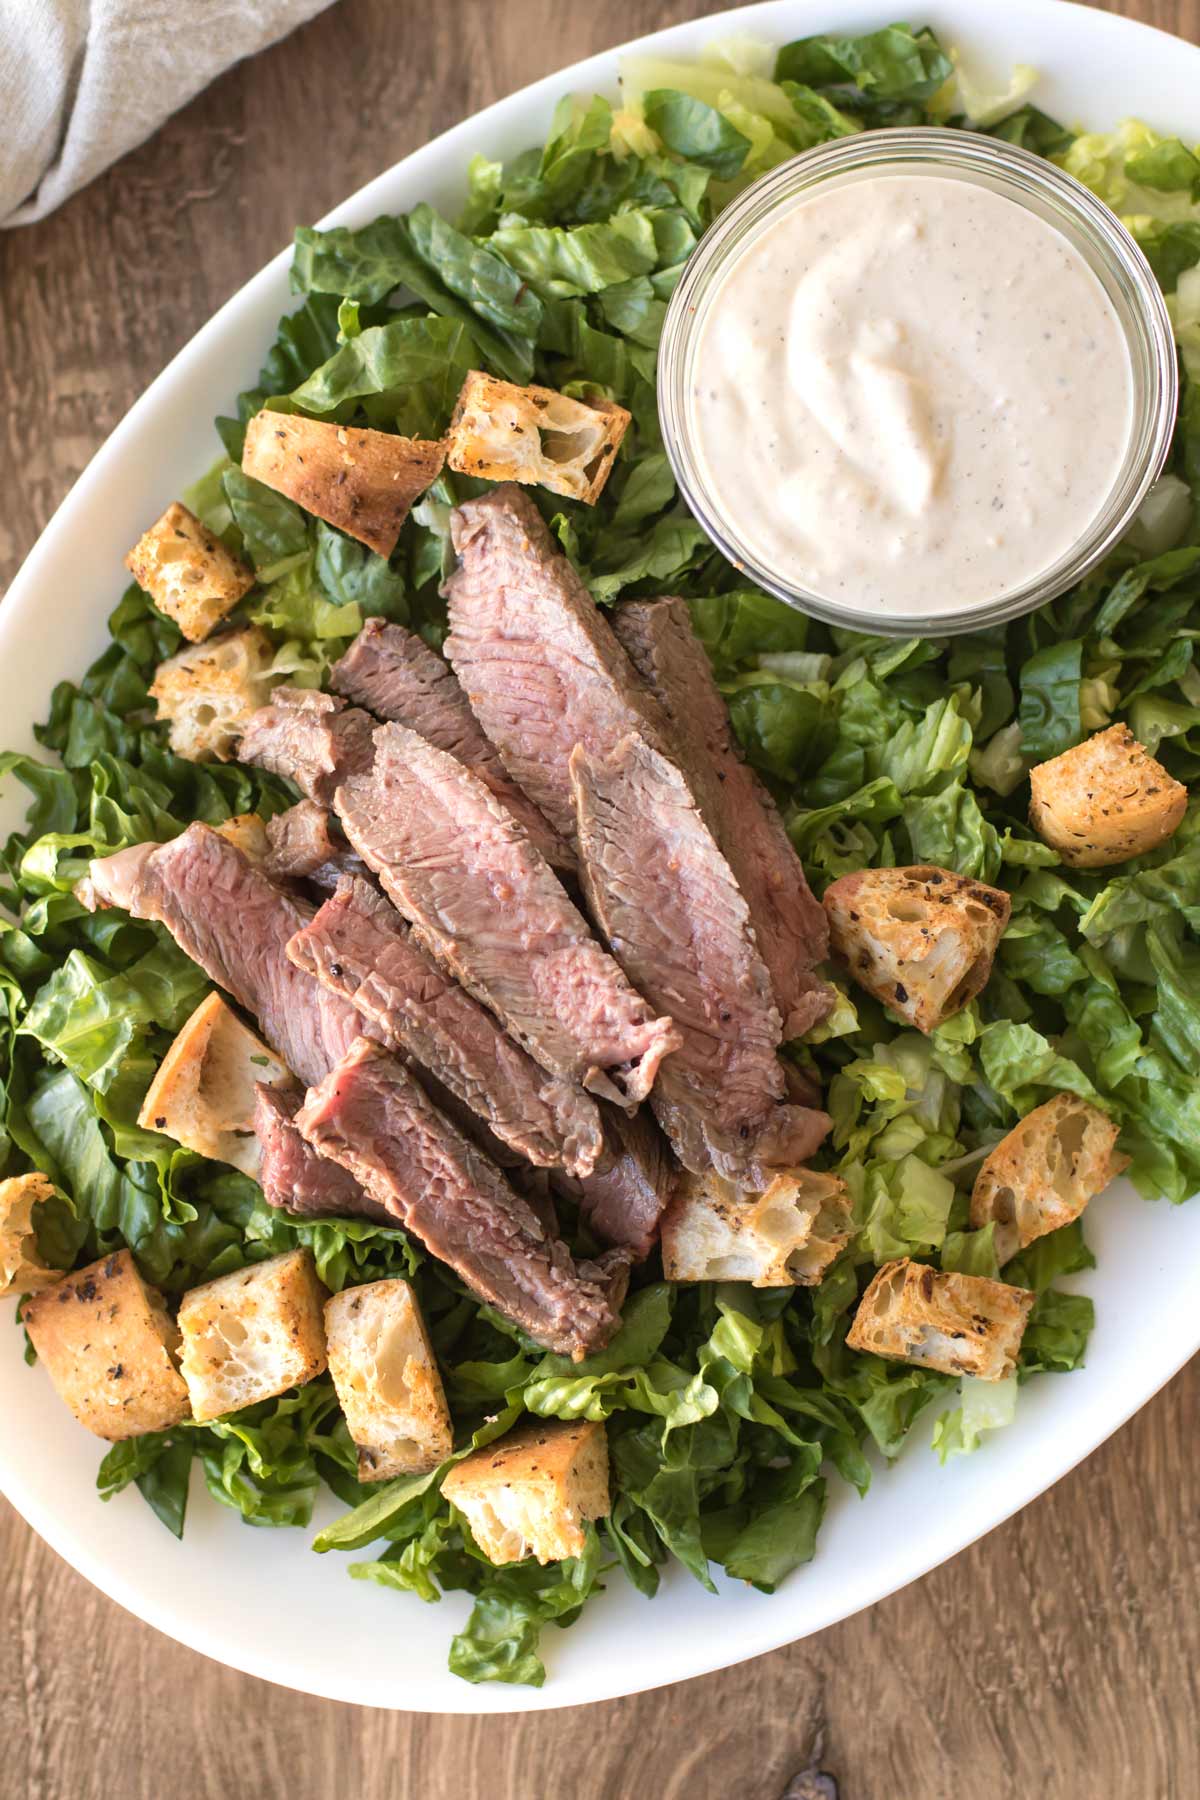 a platter with lettuce and topped with croutons, sliced steak, and a small bowl of caesar dressing.